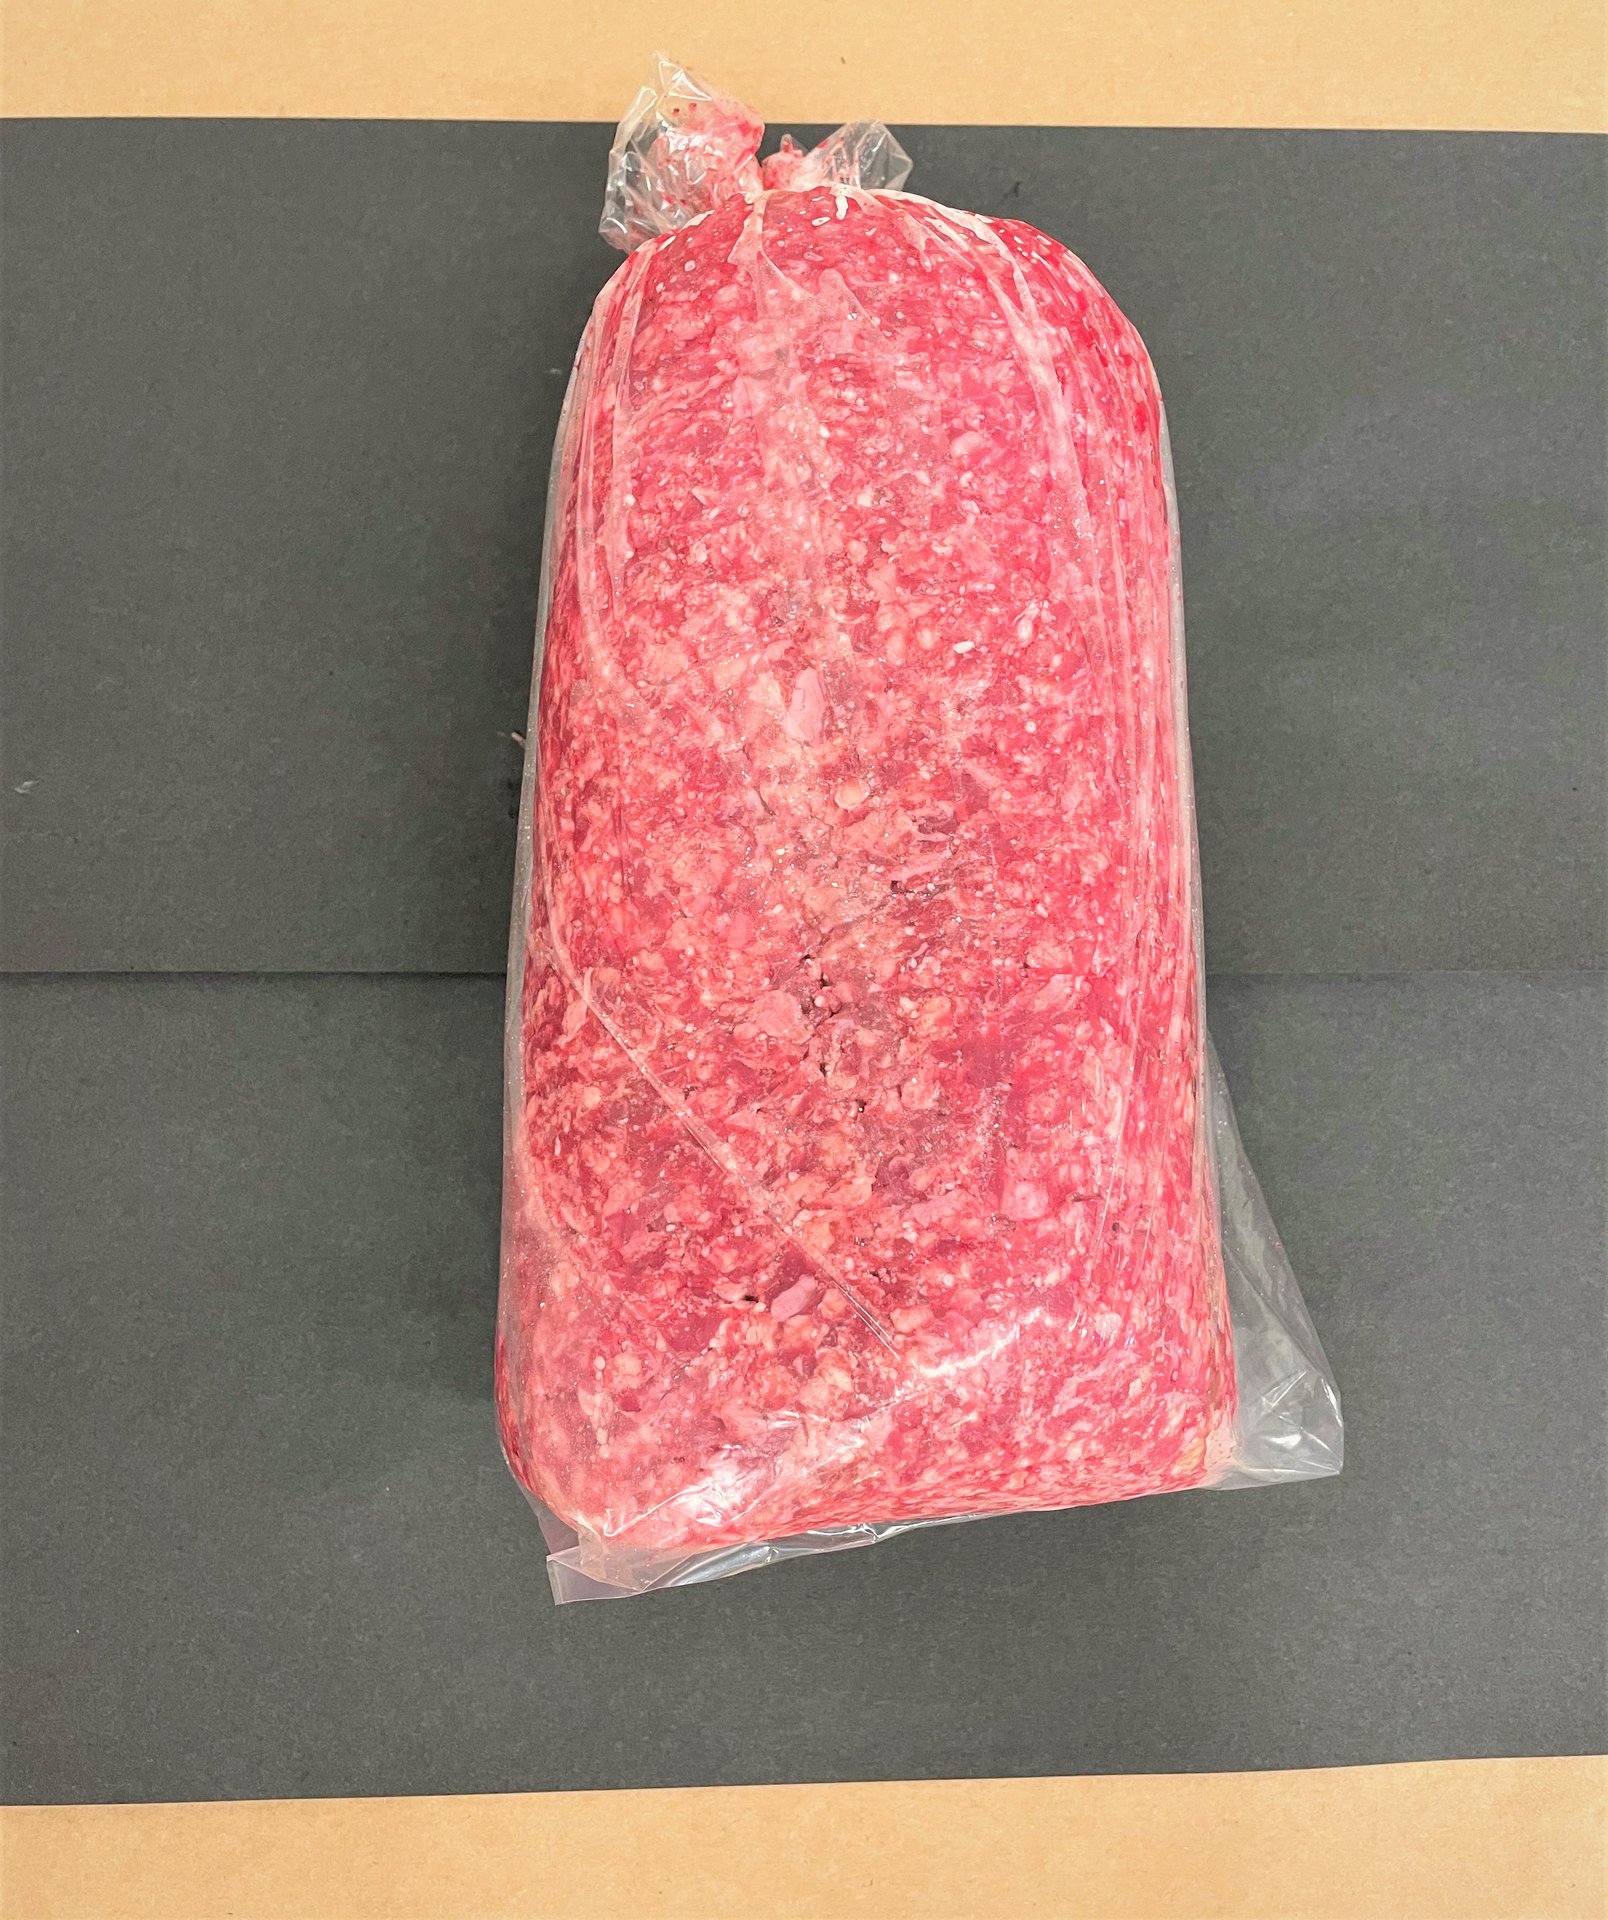 5 lb. Bag Ground Beef, 73% - Meat Counter - Lahody Meats and Trust